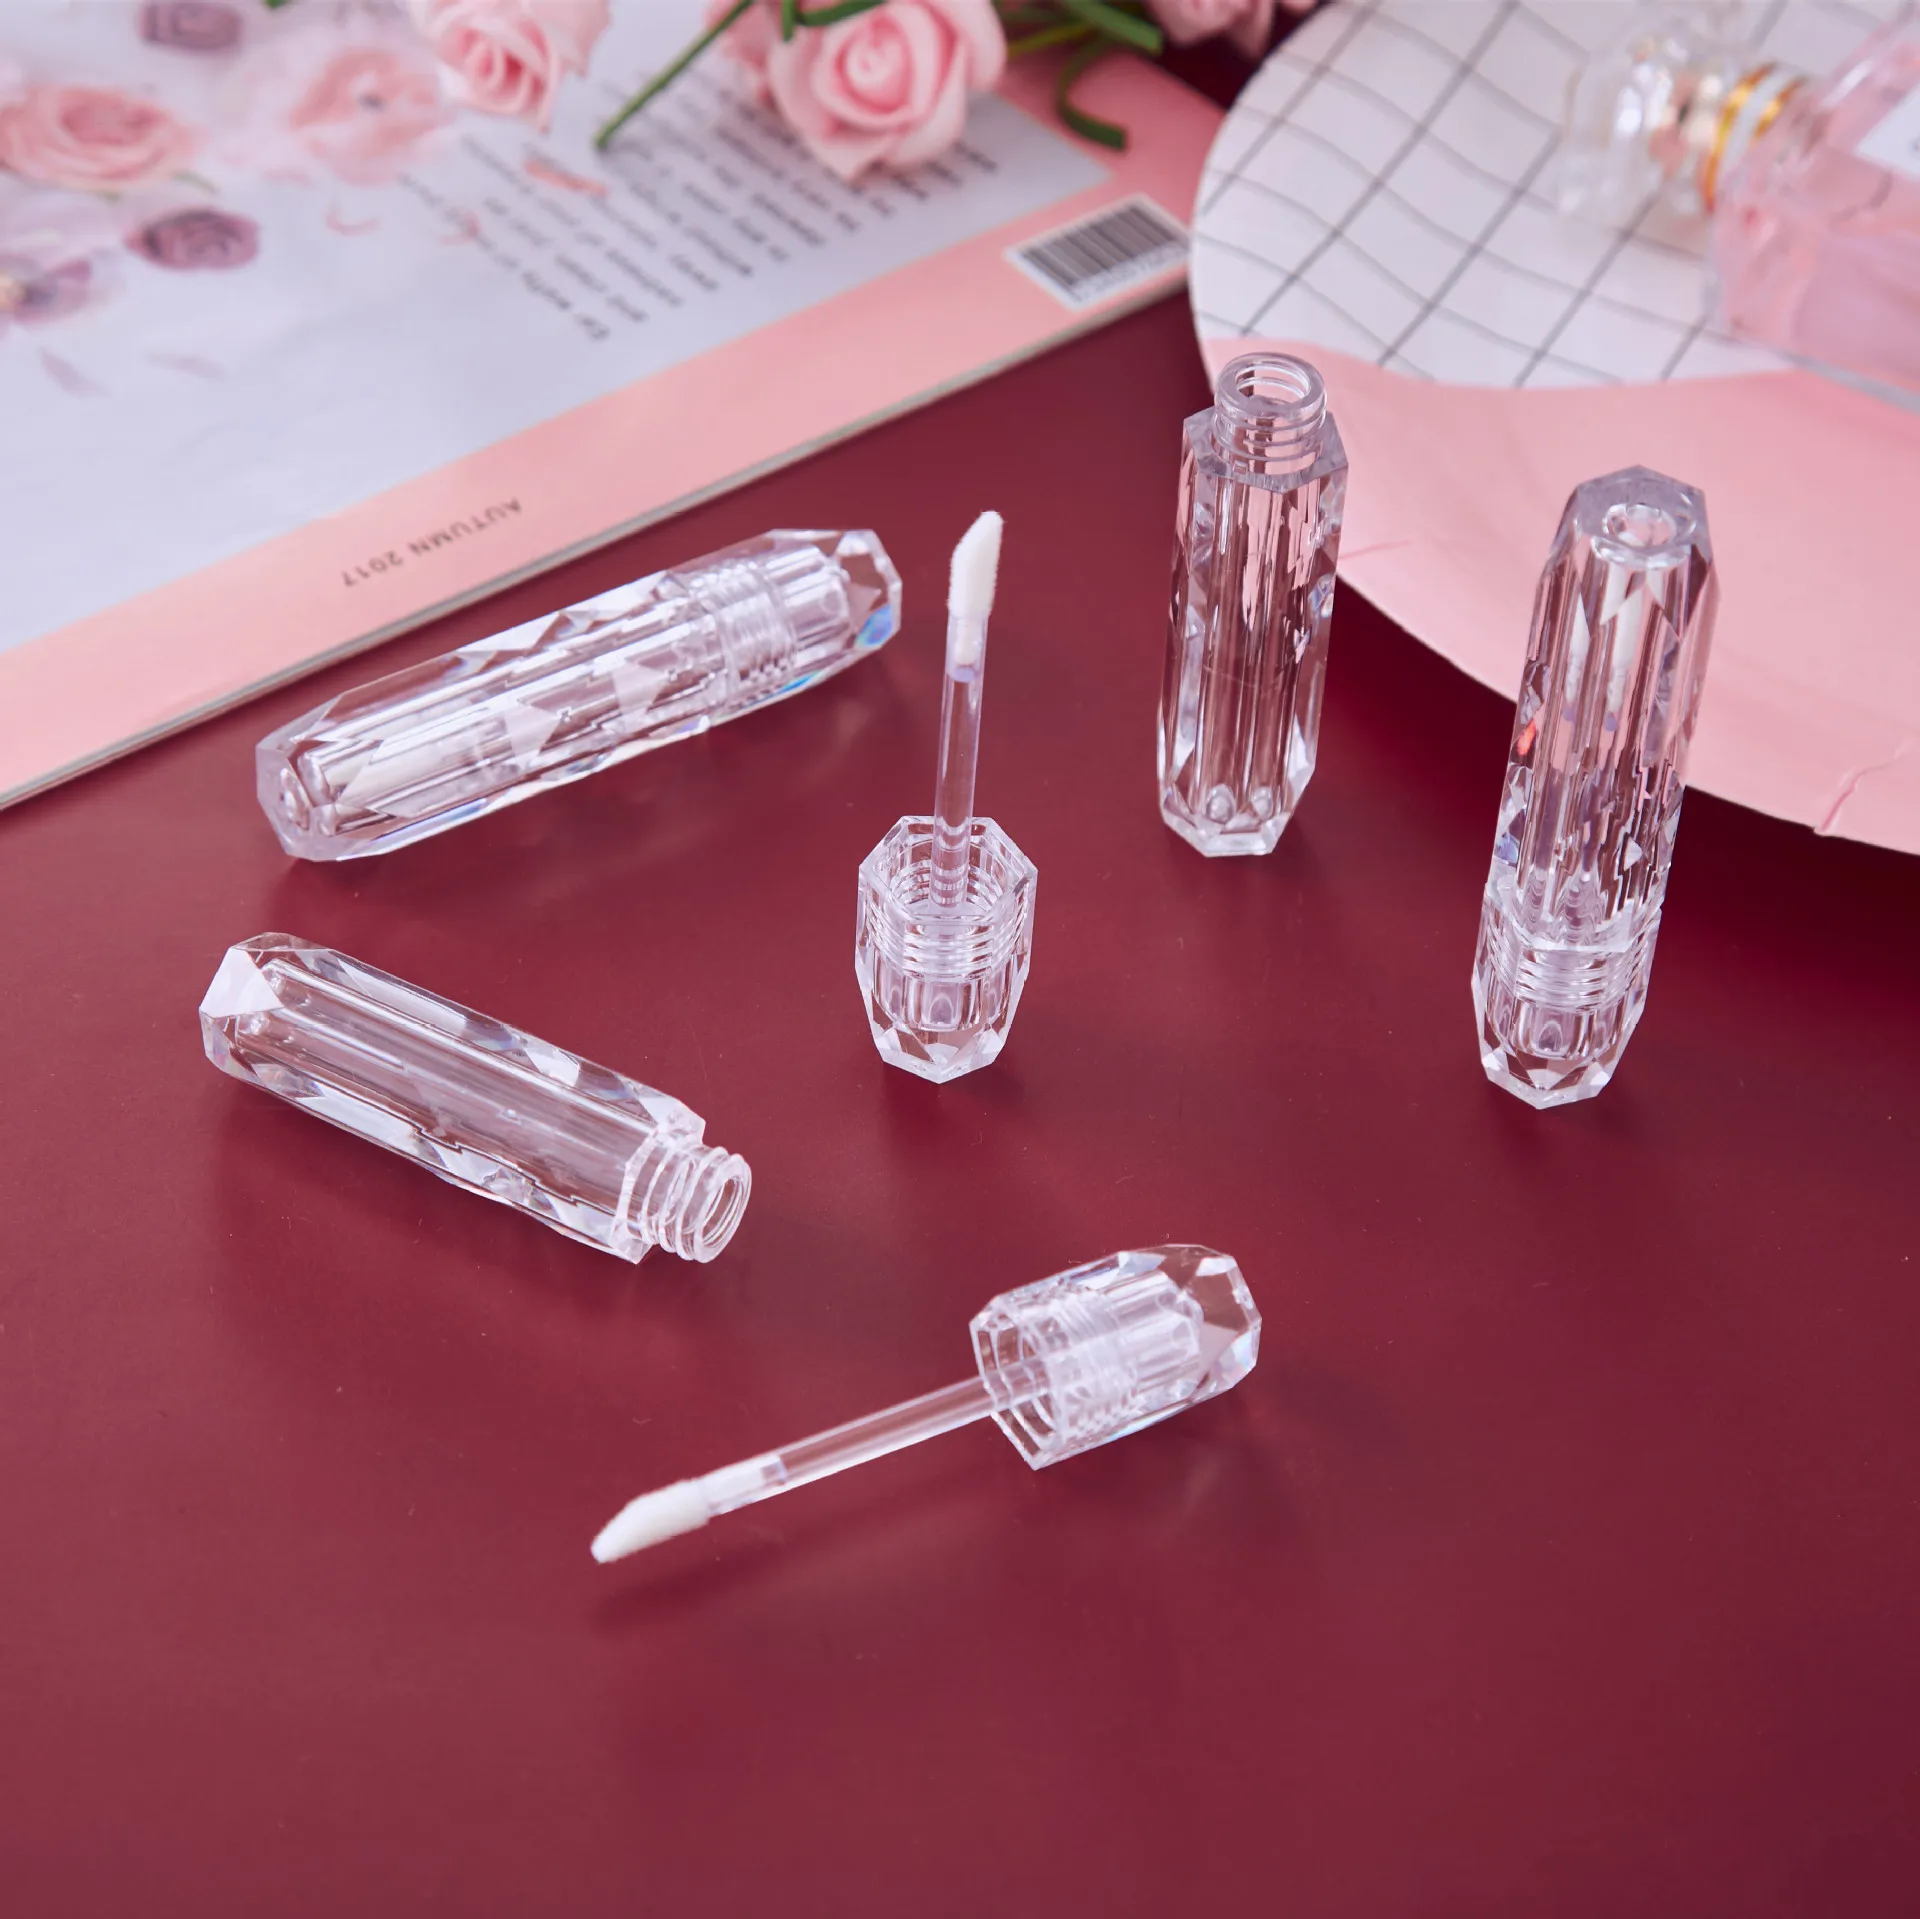 2.5ml Diamond Clear Plastic Lip Gloss Empty Tube Cosmetic LipGloss Container Packaging 50pcs 5ml empty lip gloss container pink frosted labial glair tubes concealer round eye shadow tube lipgloss lip balm packaging